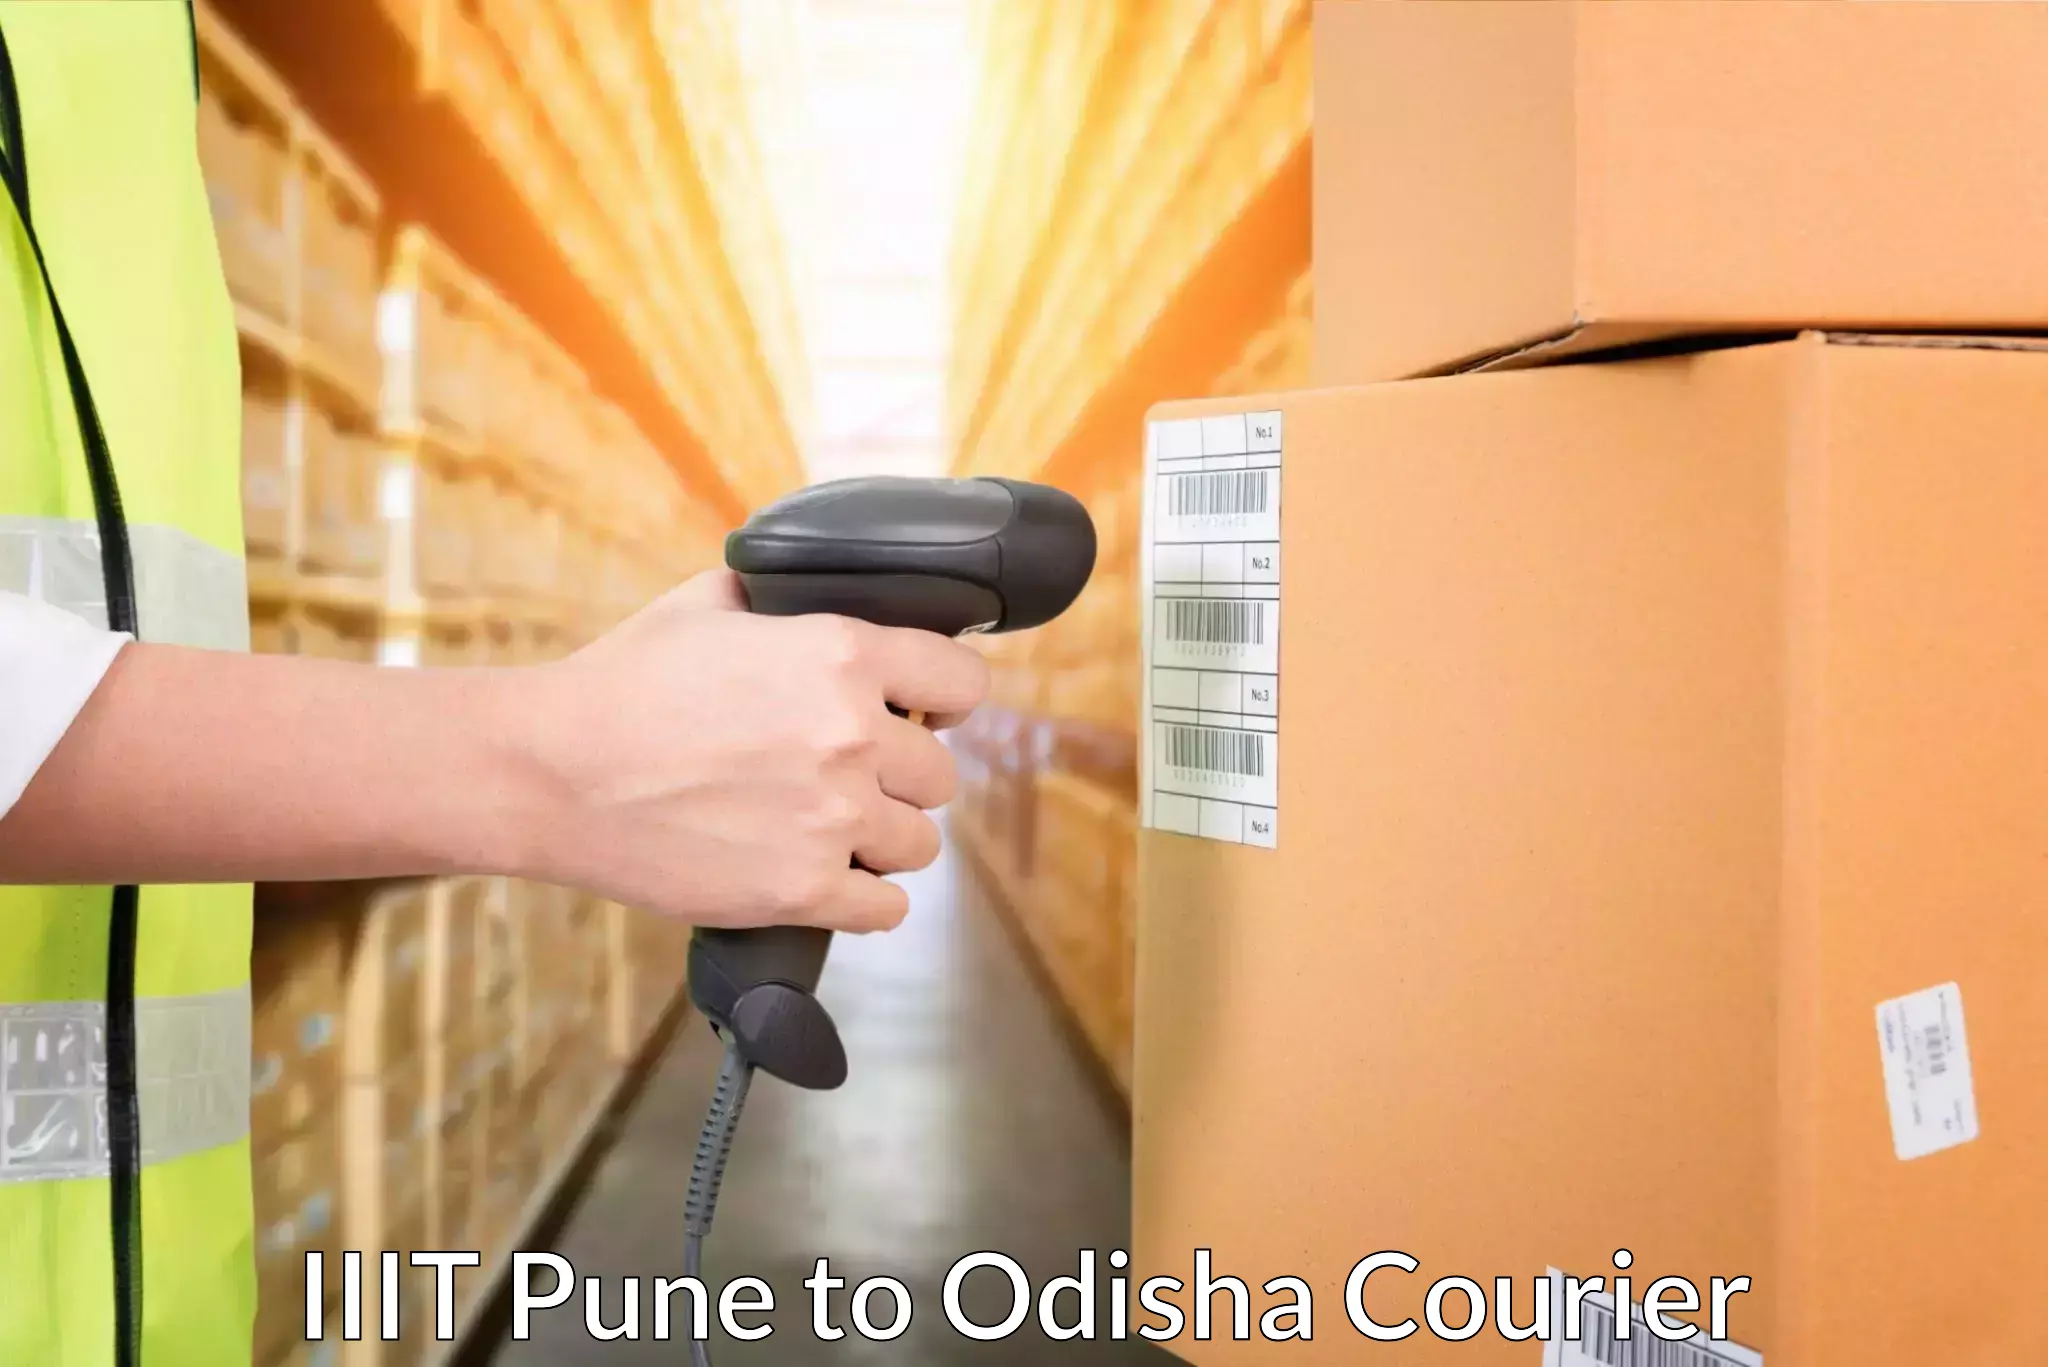 Cash on delivery service in IIIT Pune to Bamra